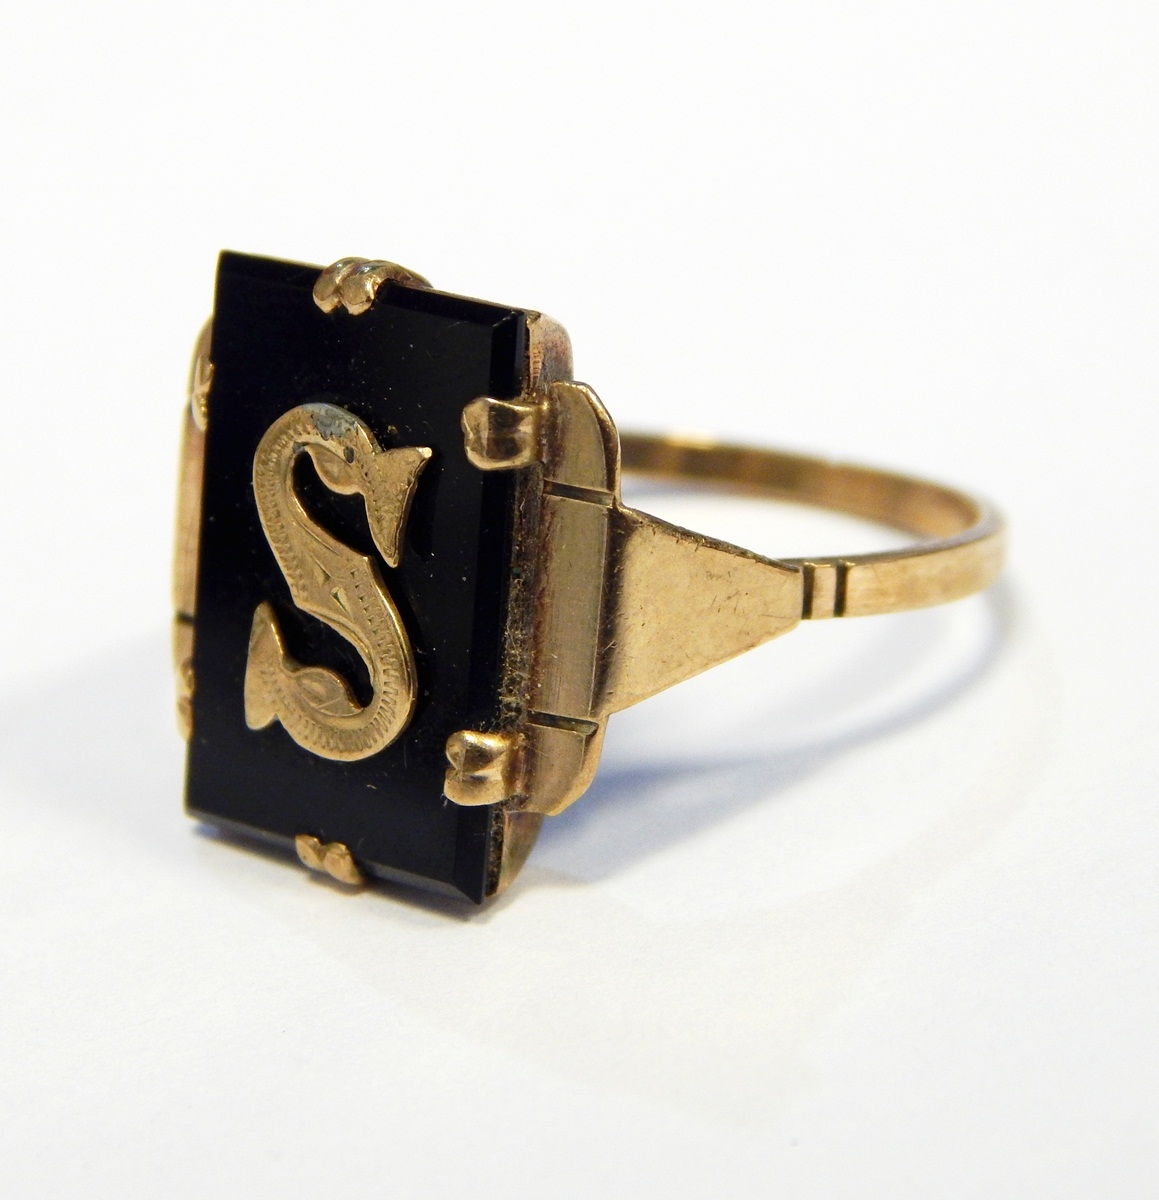 9ct gold and black onyx initial ring "S"